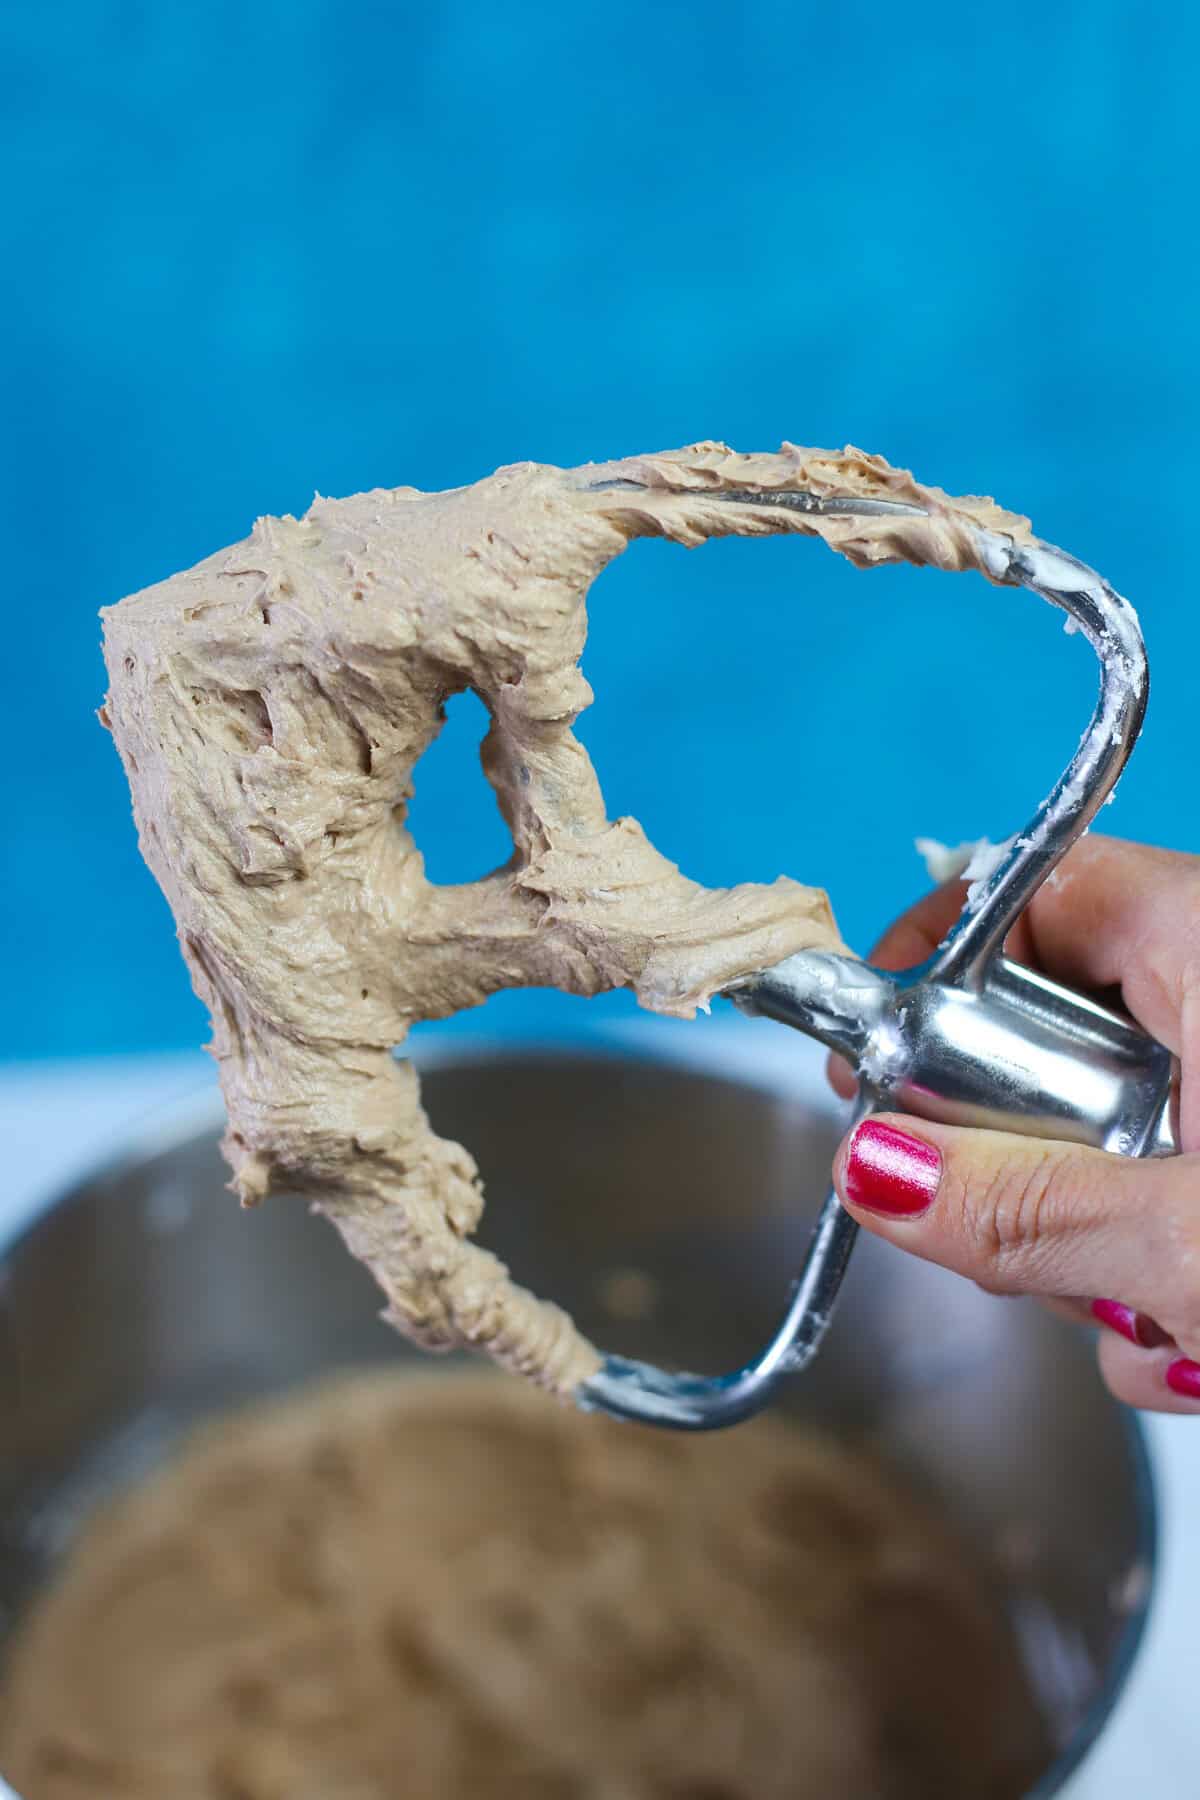 A paddle attachment from a mixer covered in chocolate buttercream frosting being held above the mixing bowl full of frosting.